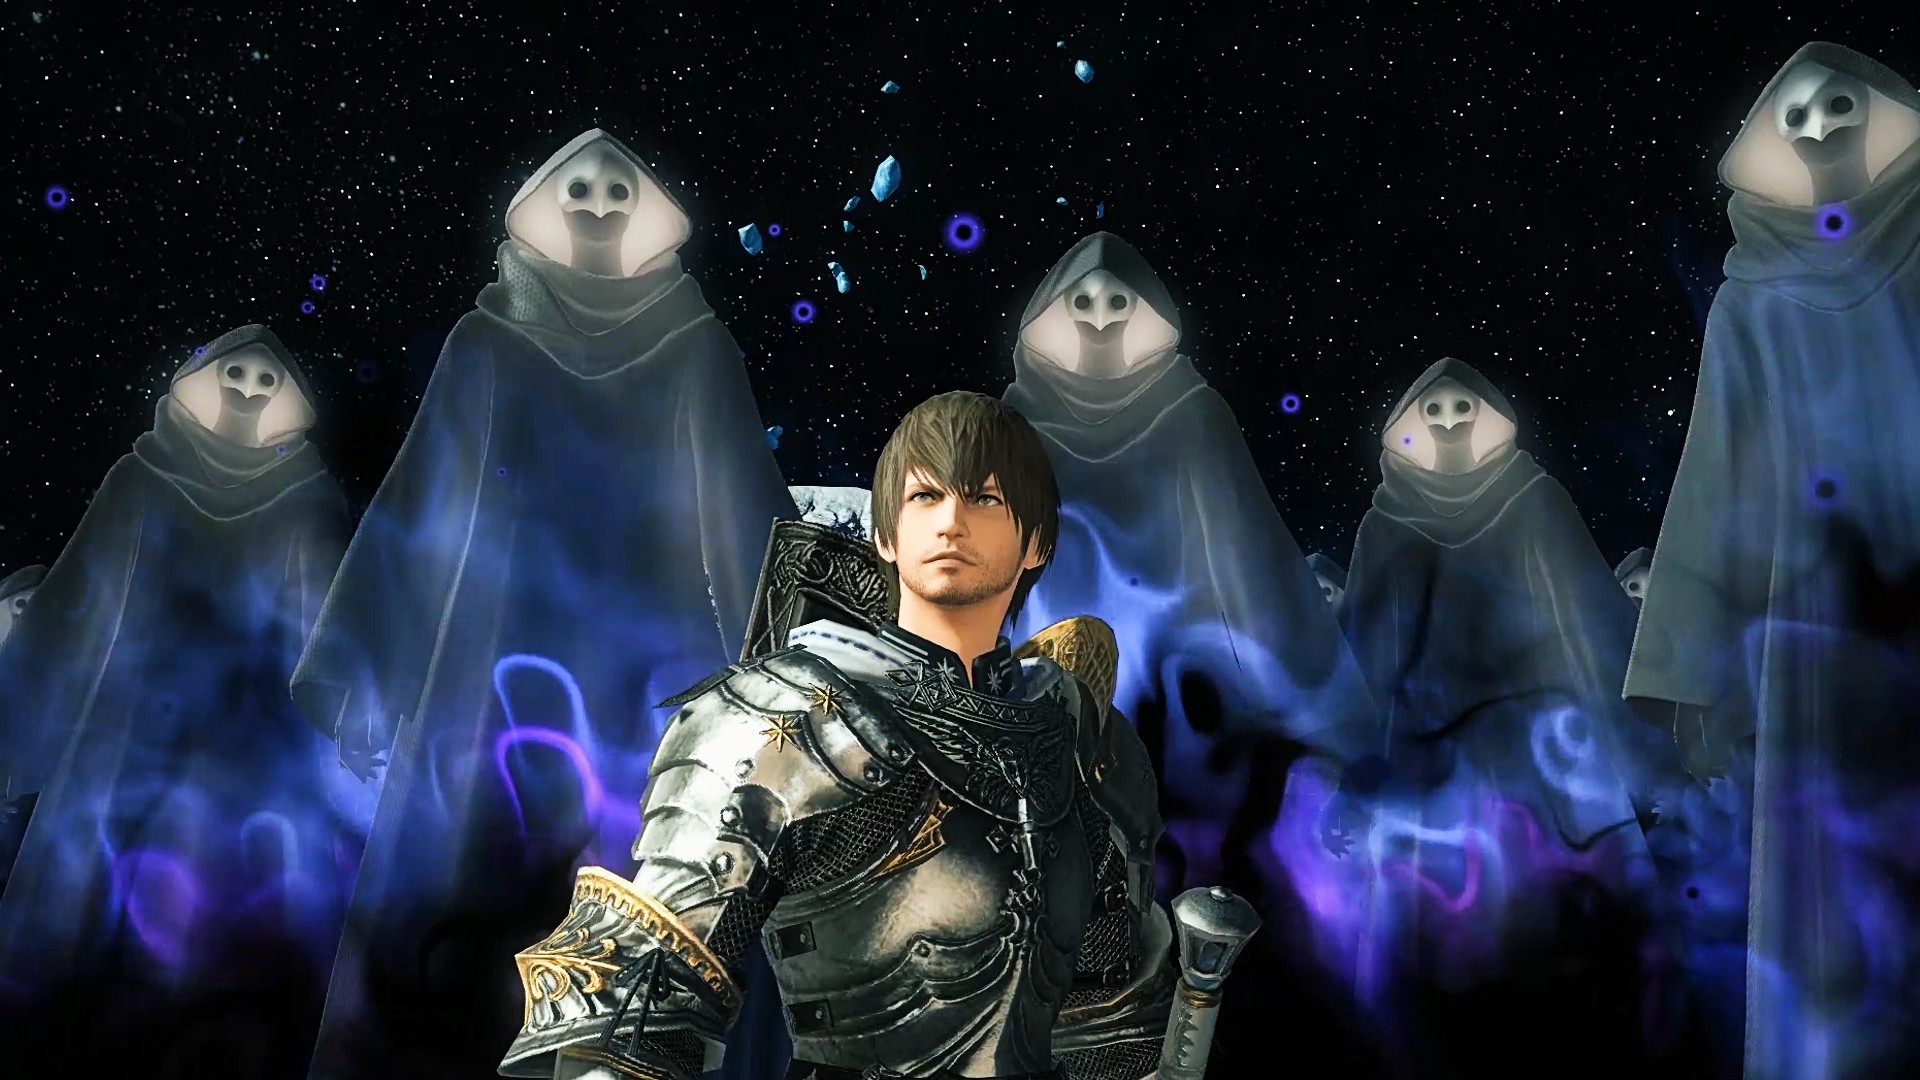 FFXIV 6.08 patch brings huge buffs for Paladin, Dancer, and Dragoon